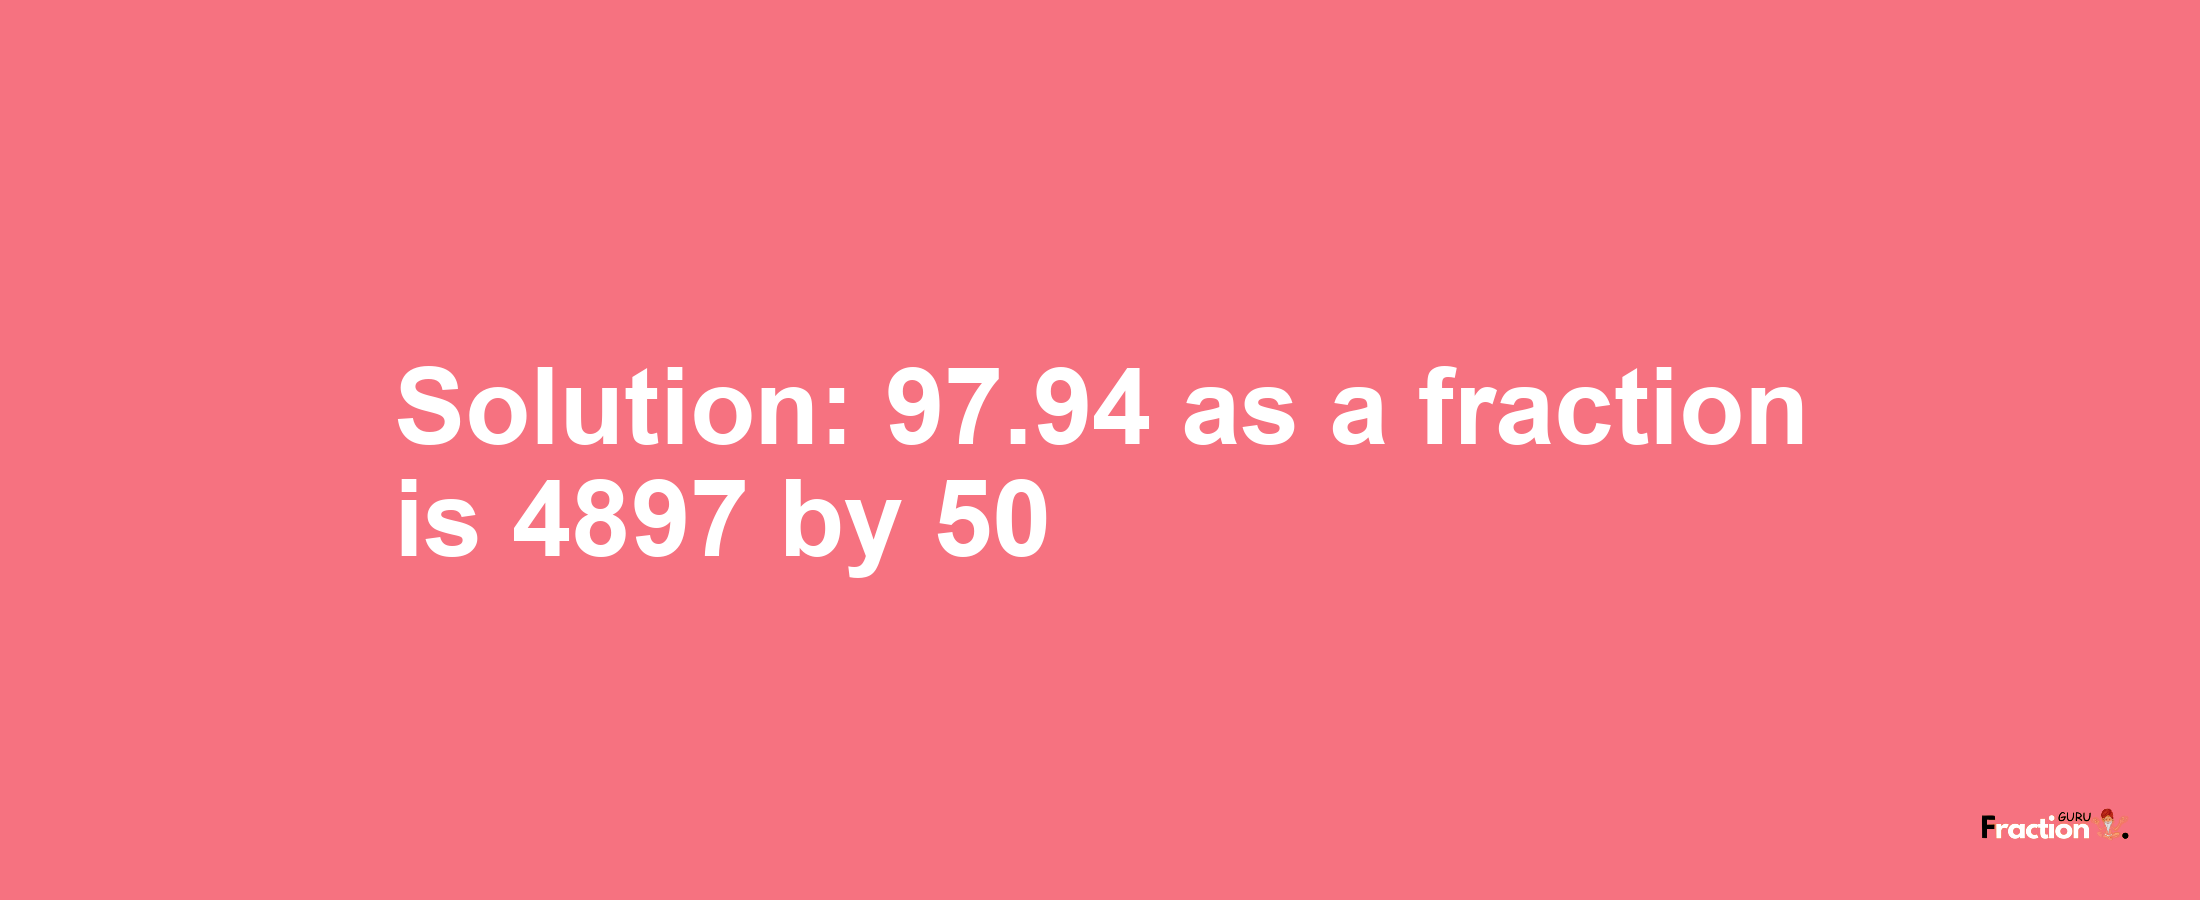 Solution:97.94 as a fraction is 4897/50